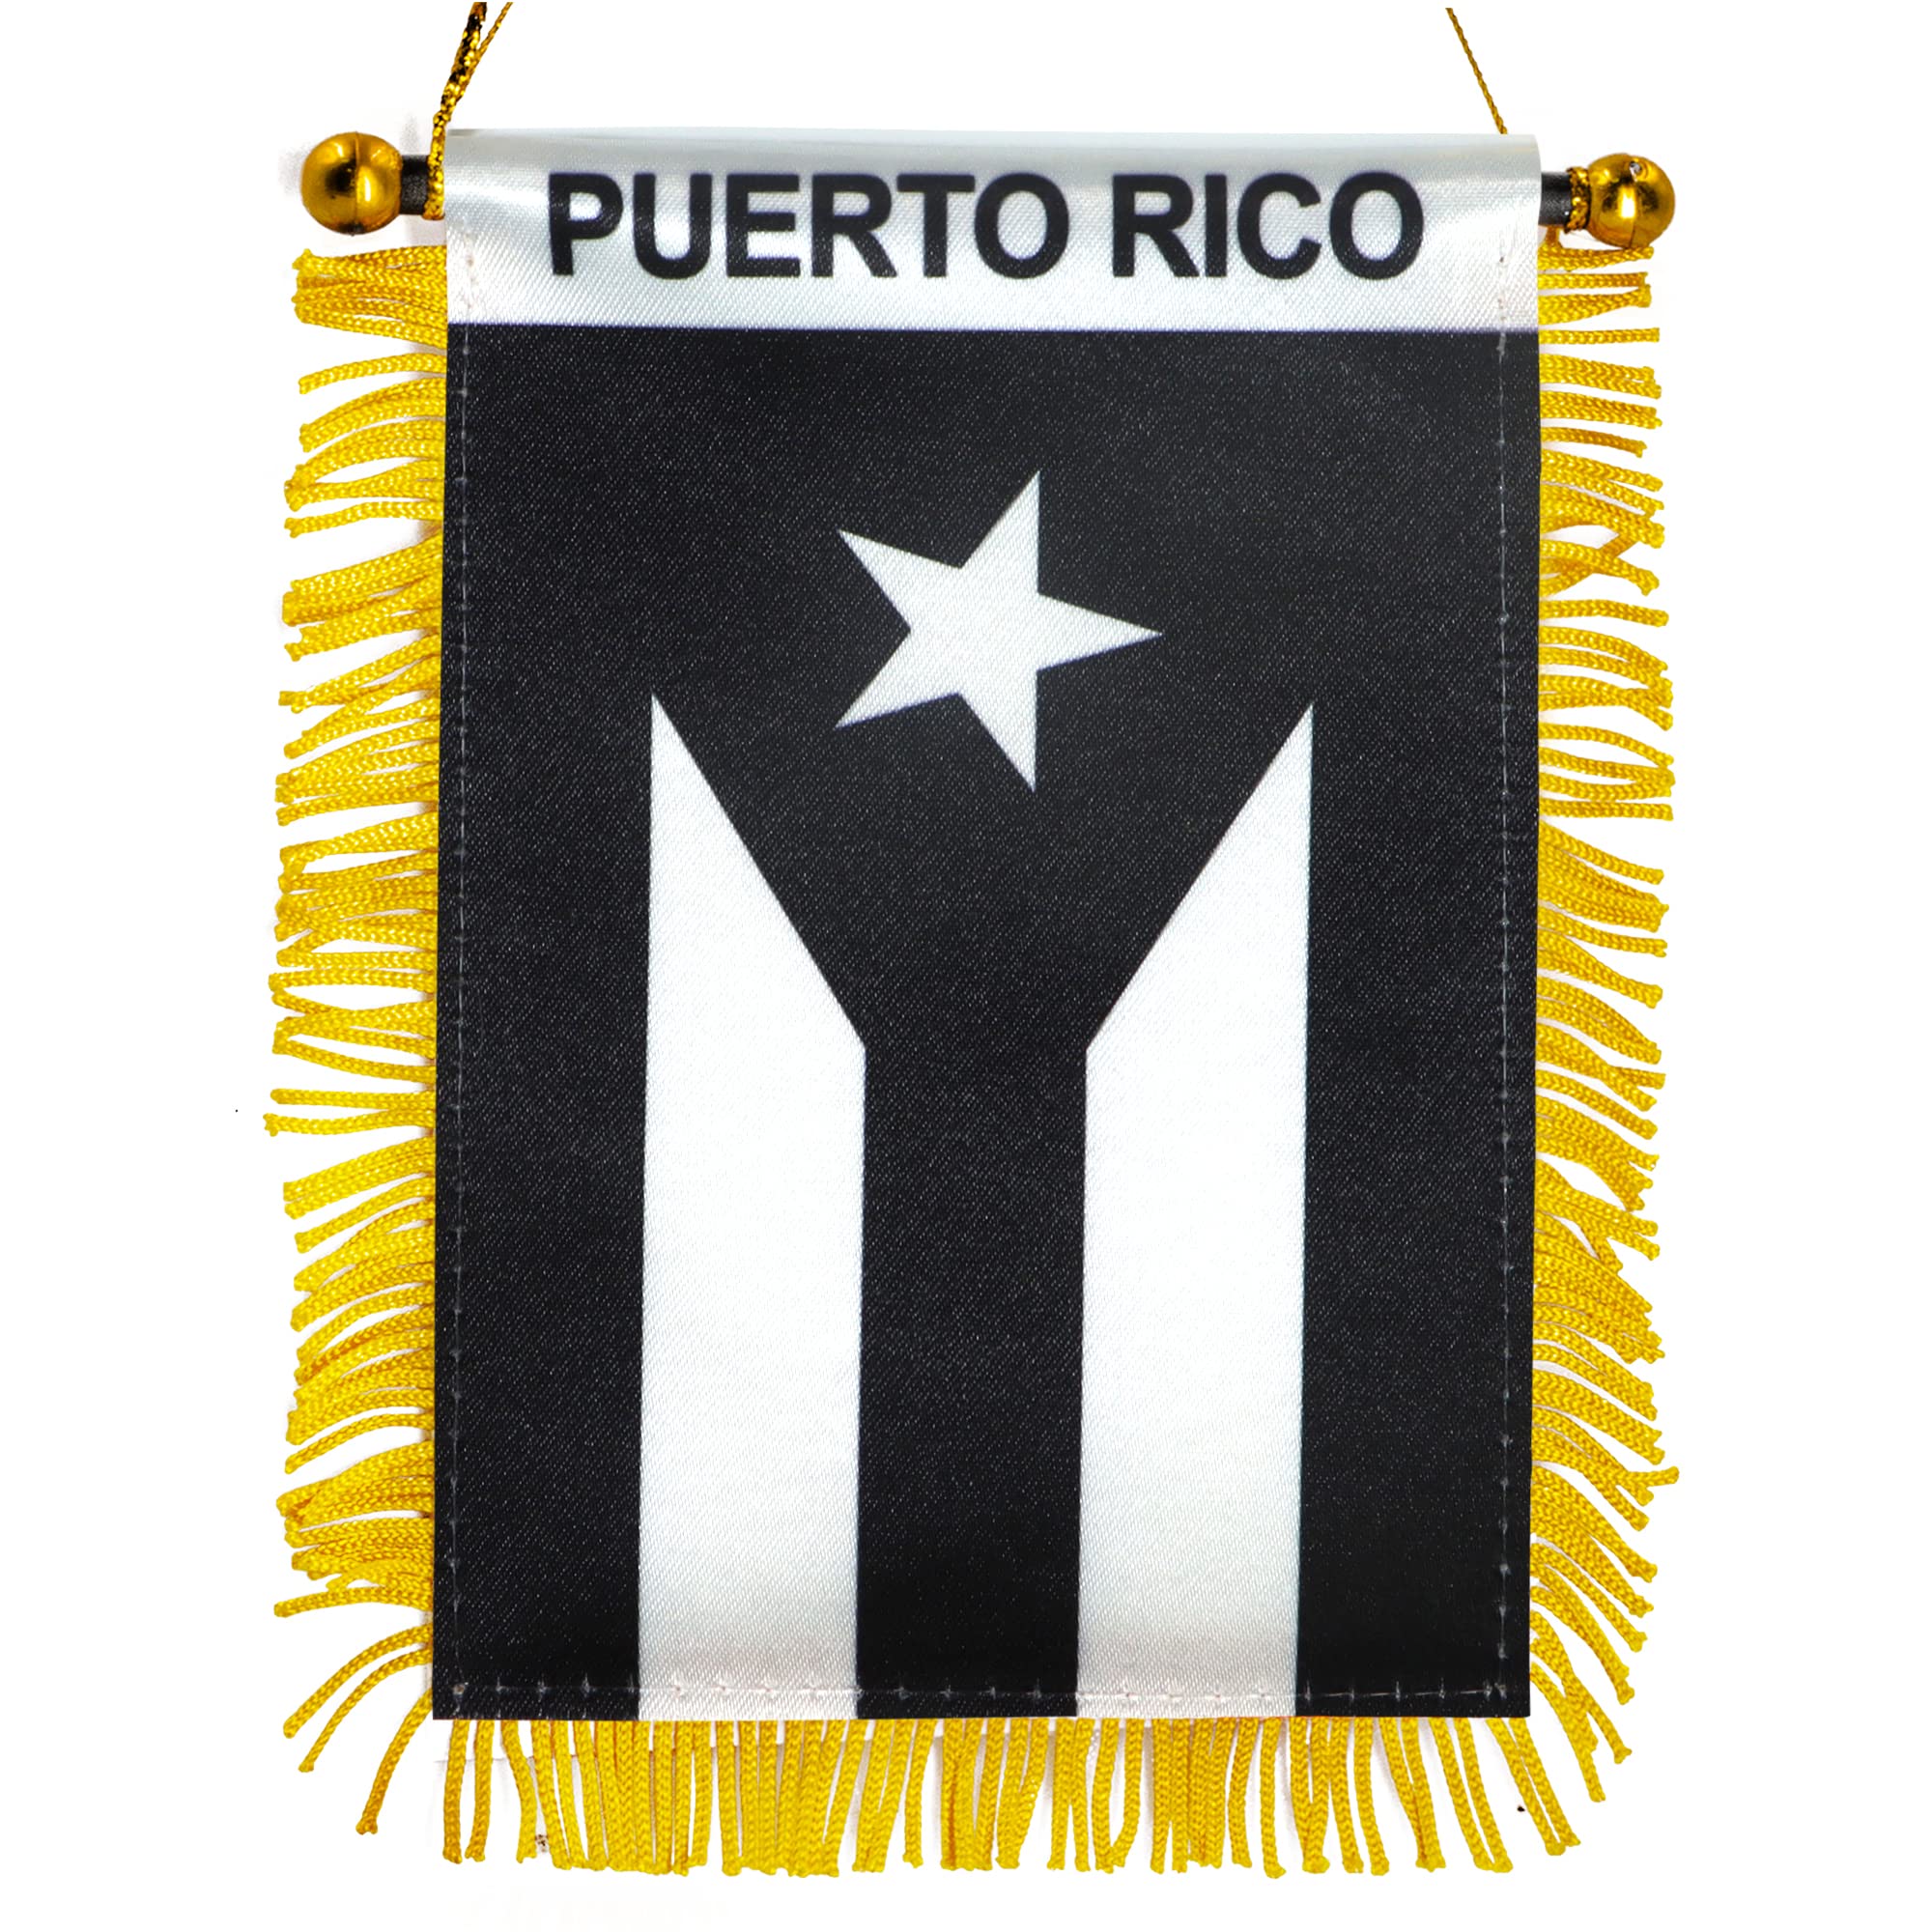 Anley 4 X 6 Inch Puerto Rico Fringy Window Hanging Flag - Mini Flag Banner & Car Rearview Mirror D?cor - Fringed Puerto Rican Ha